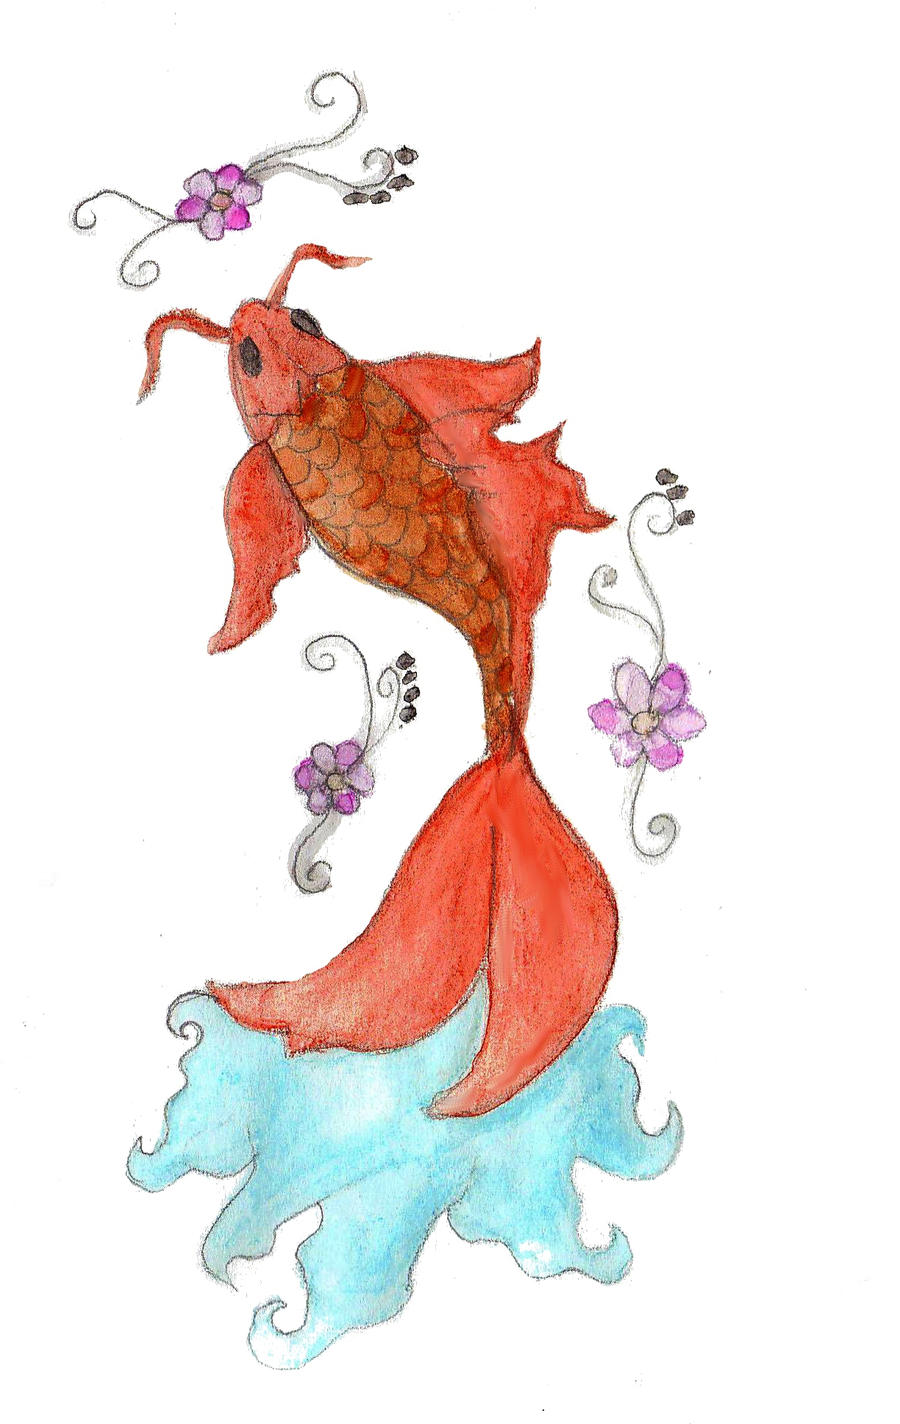 Commission Koi Fish by